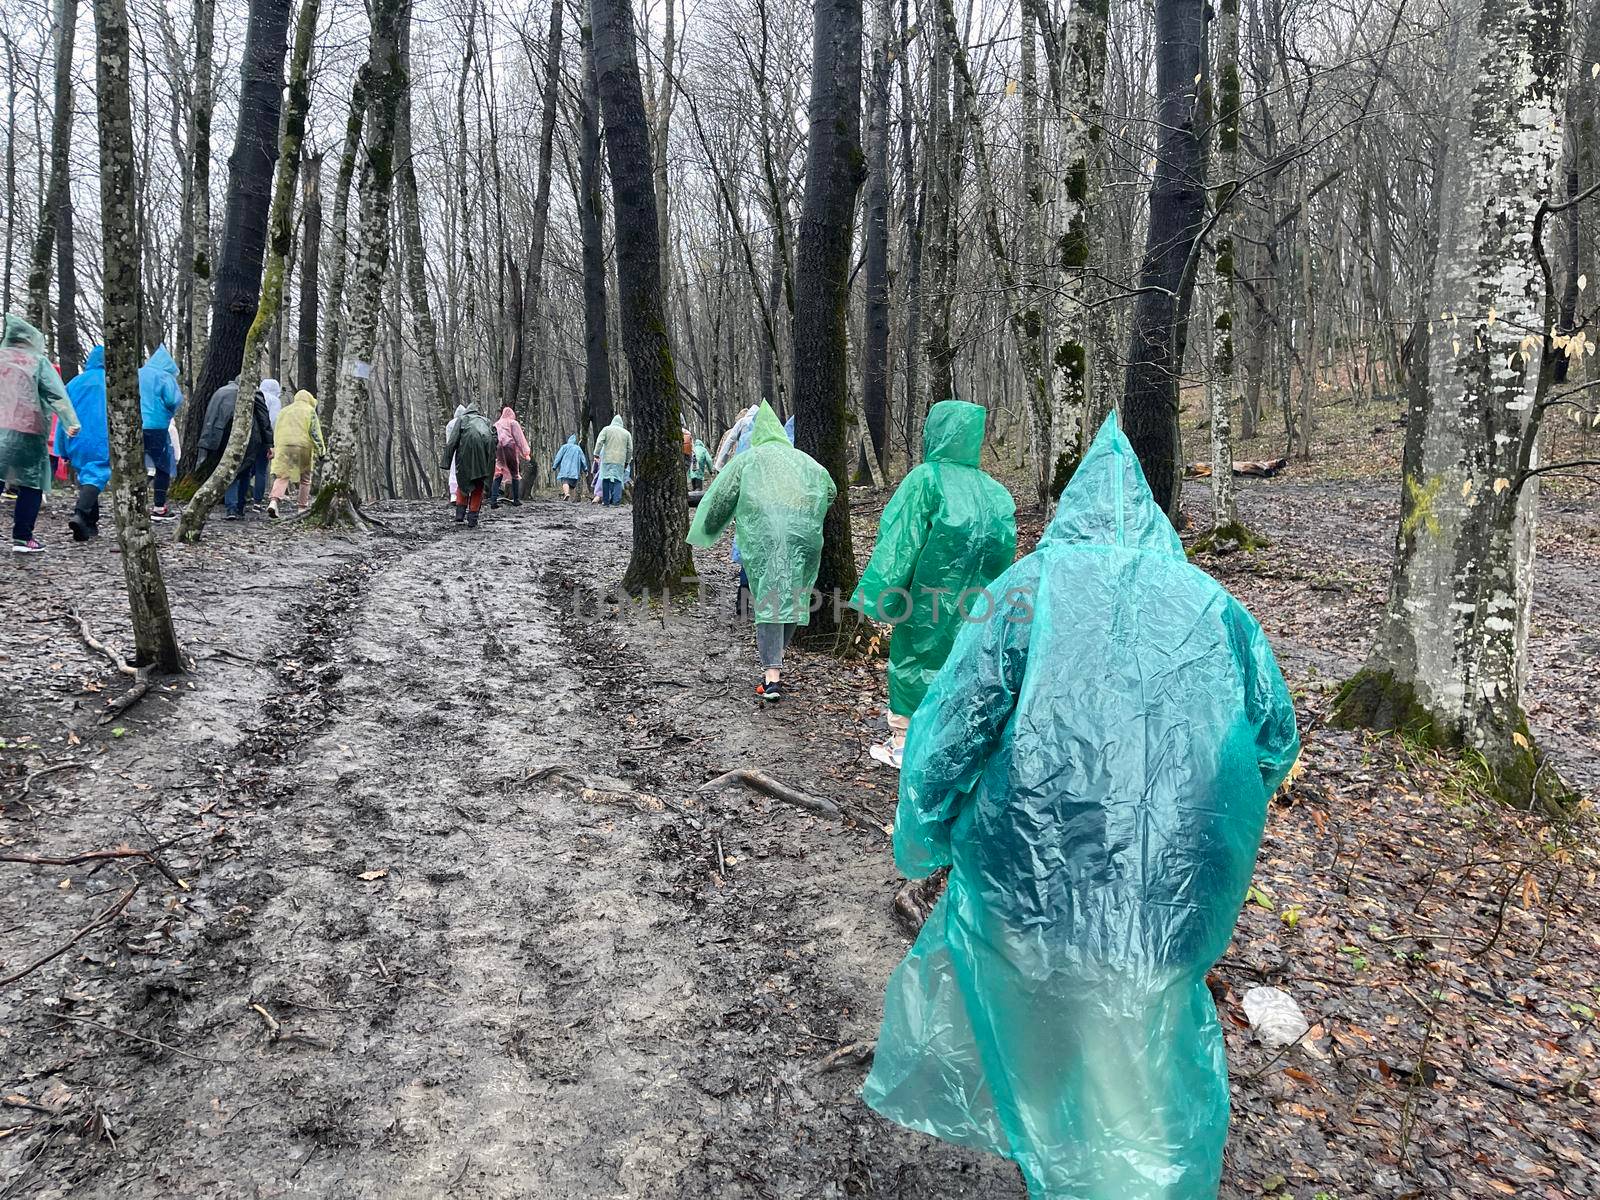 Rear view of tourists in raincoats walking through muddy forest in cloudy and rainy weather. Group of people hiking in wooded and hilly terrain. by epidemiks